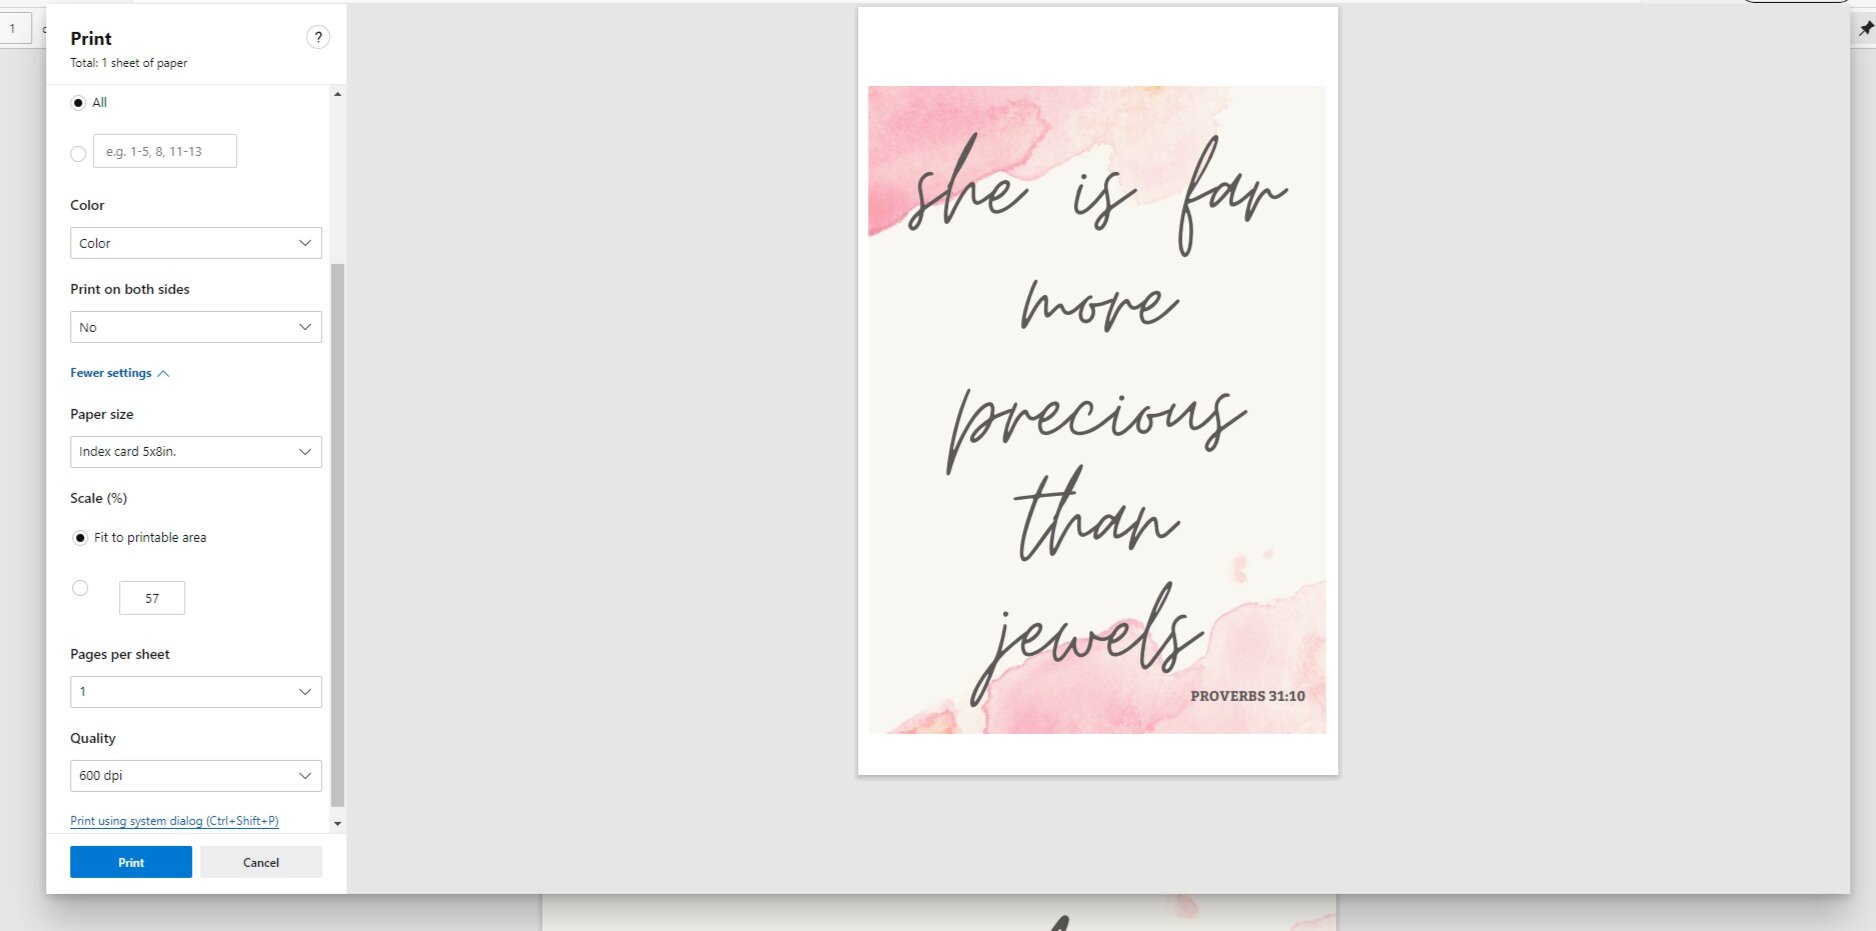 resizing PROVERBS 31 art in canva